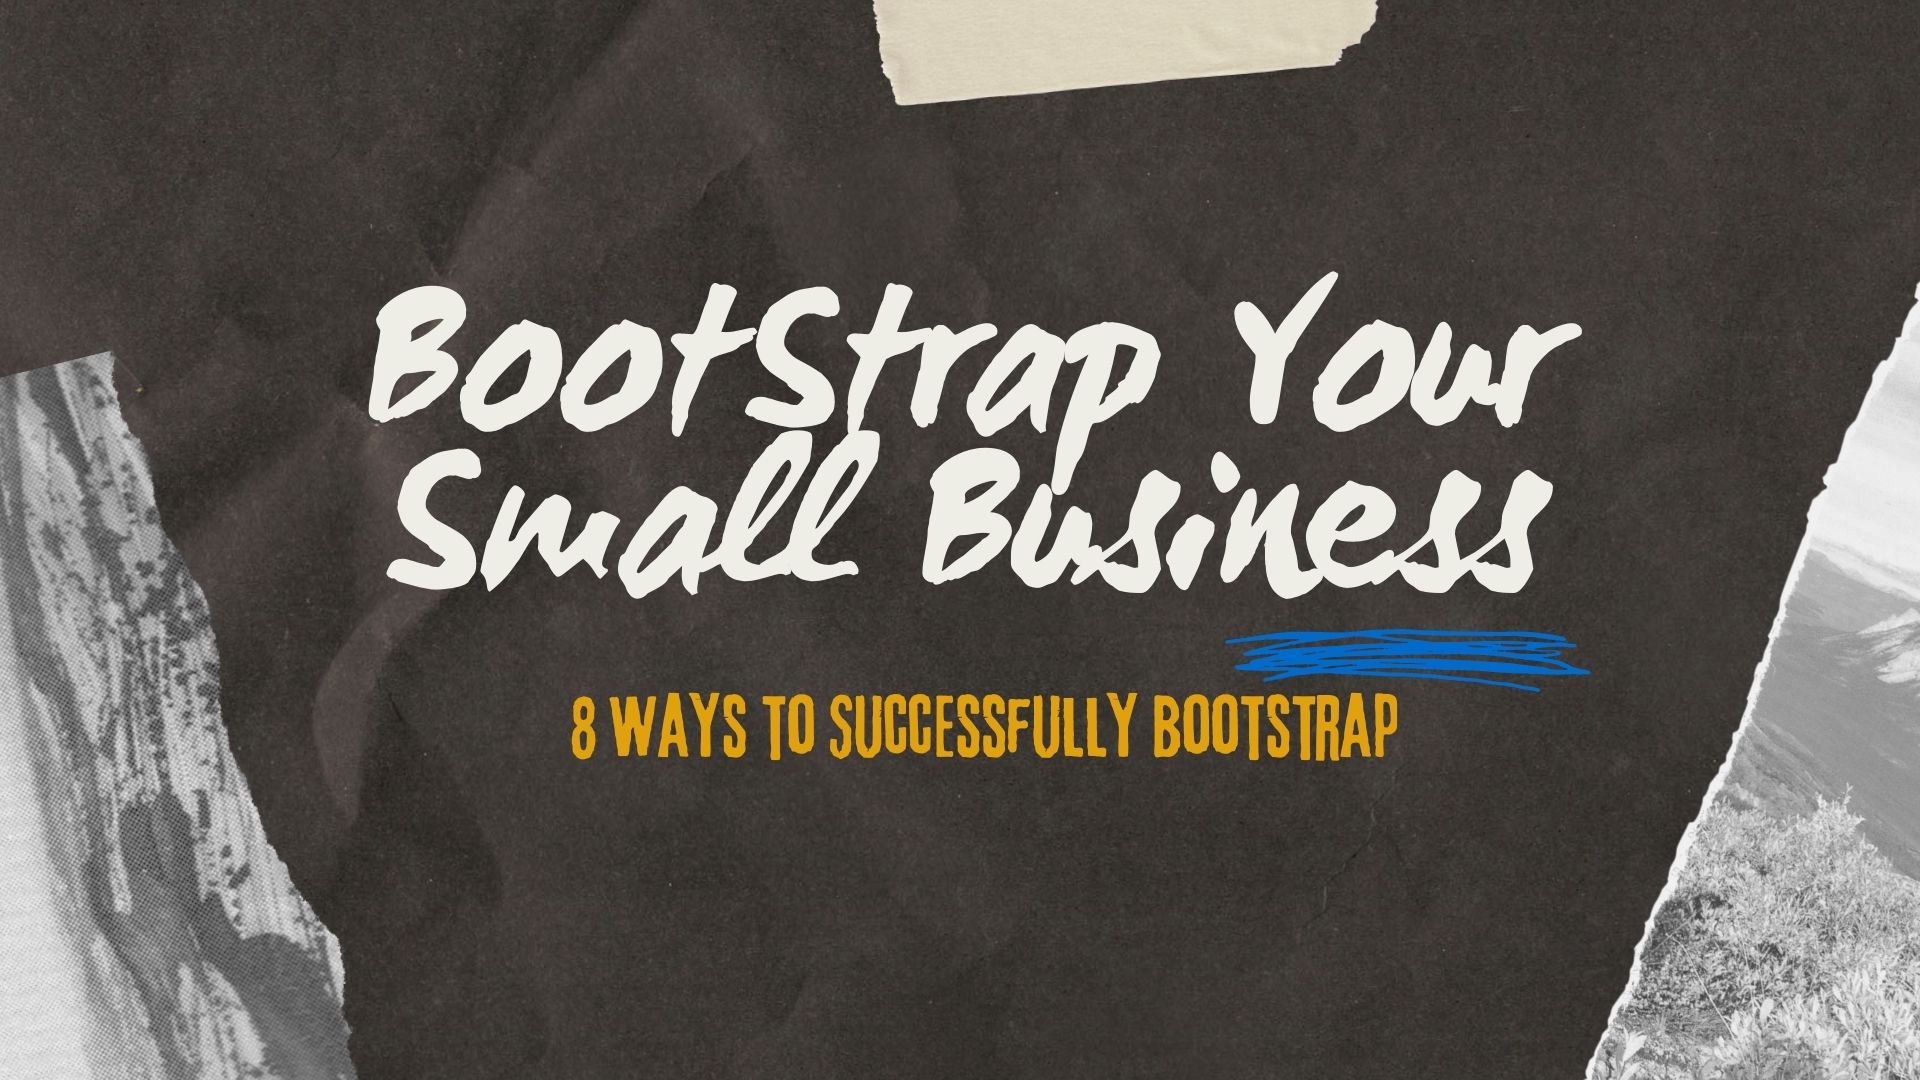 8 Ways to Bootstrap Your Small Business